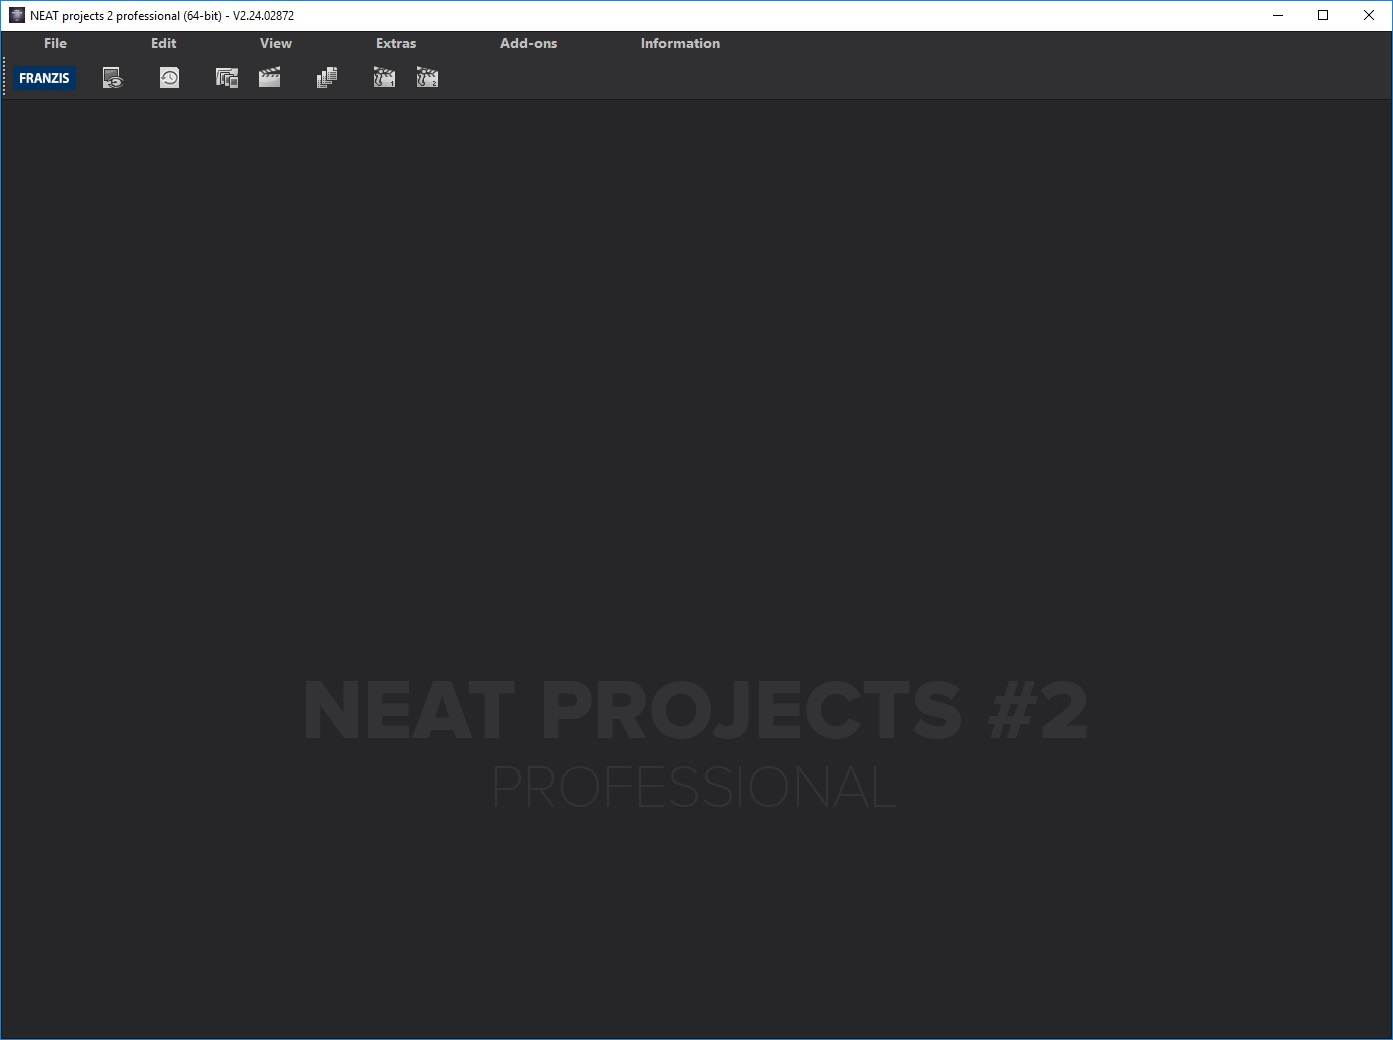 Franzis NEAT projects 3 professional v3.32.03813 SfG